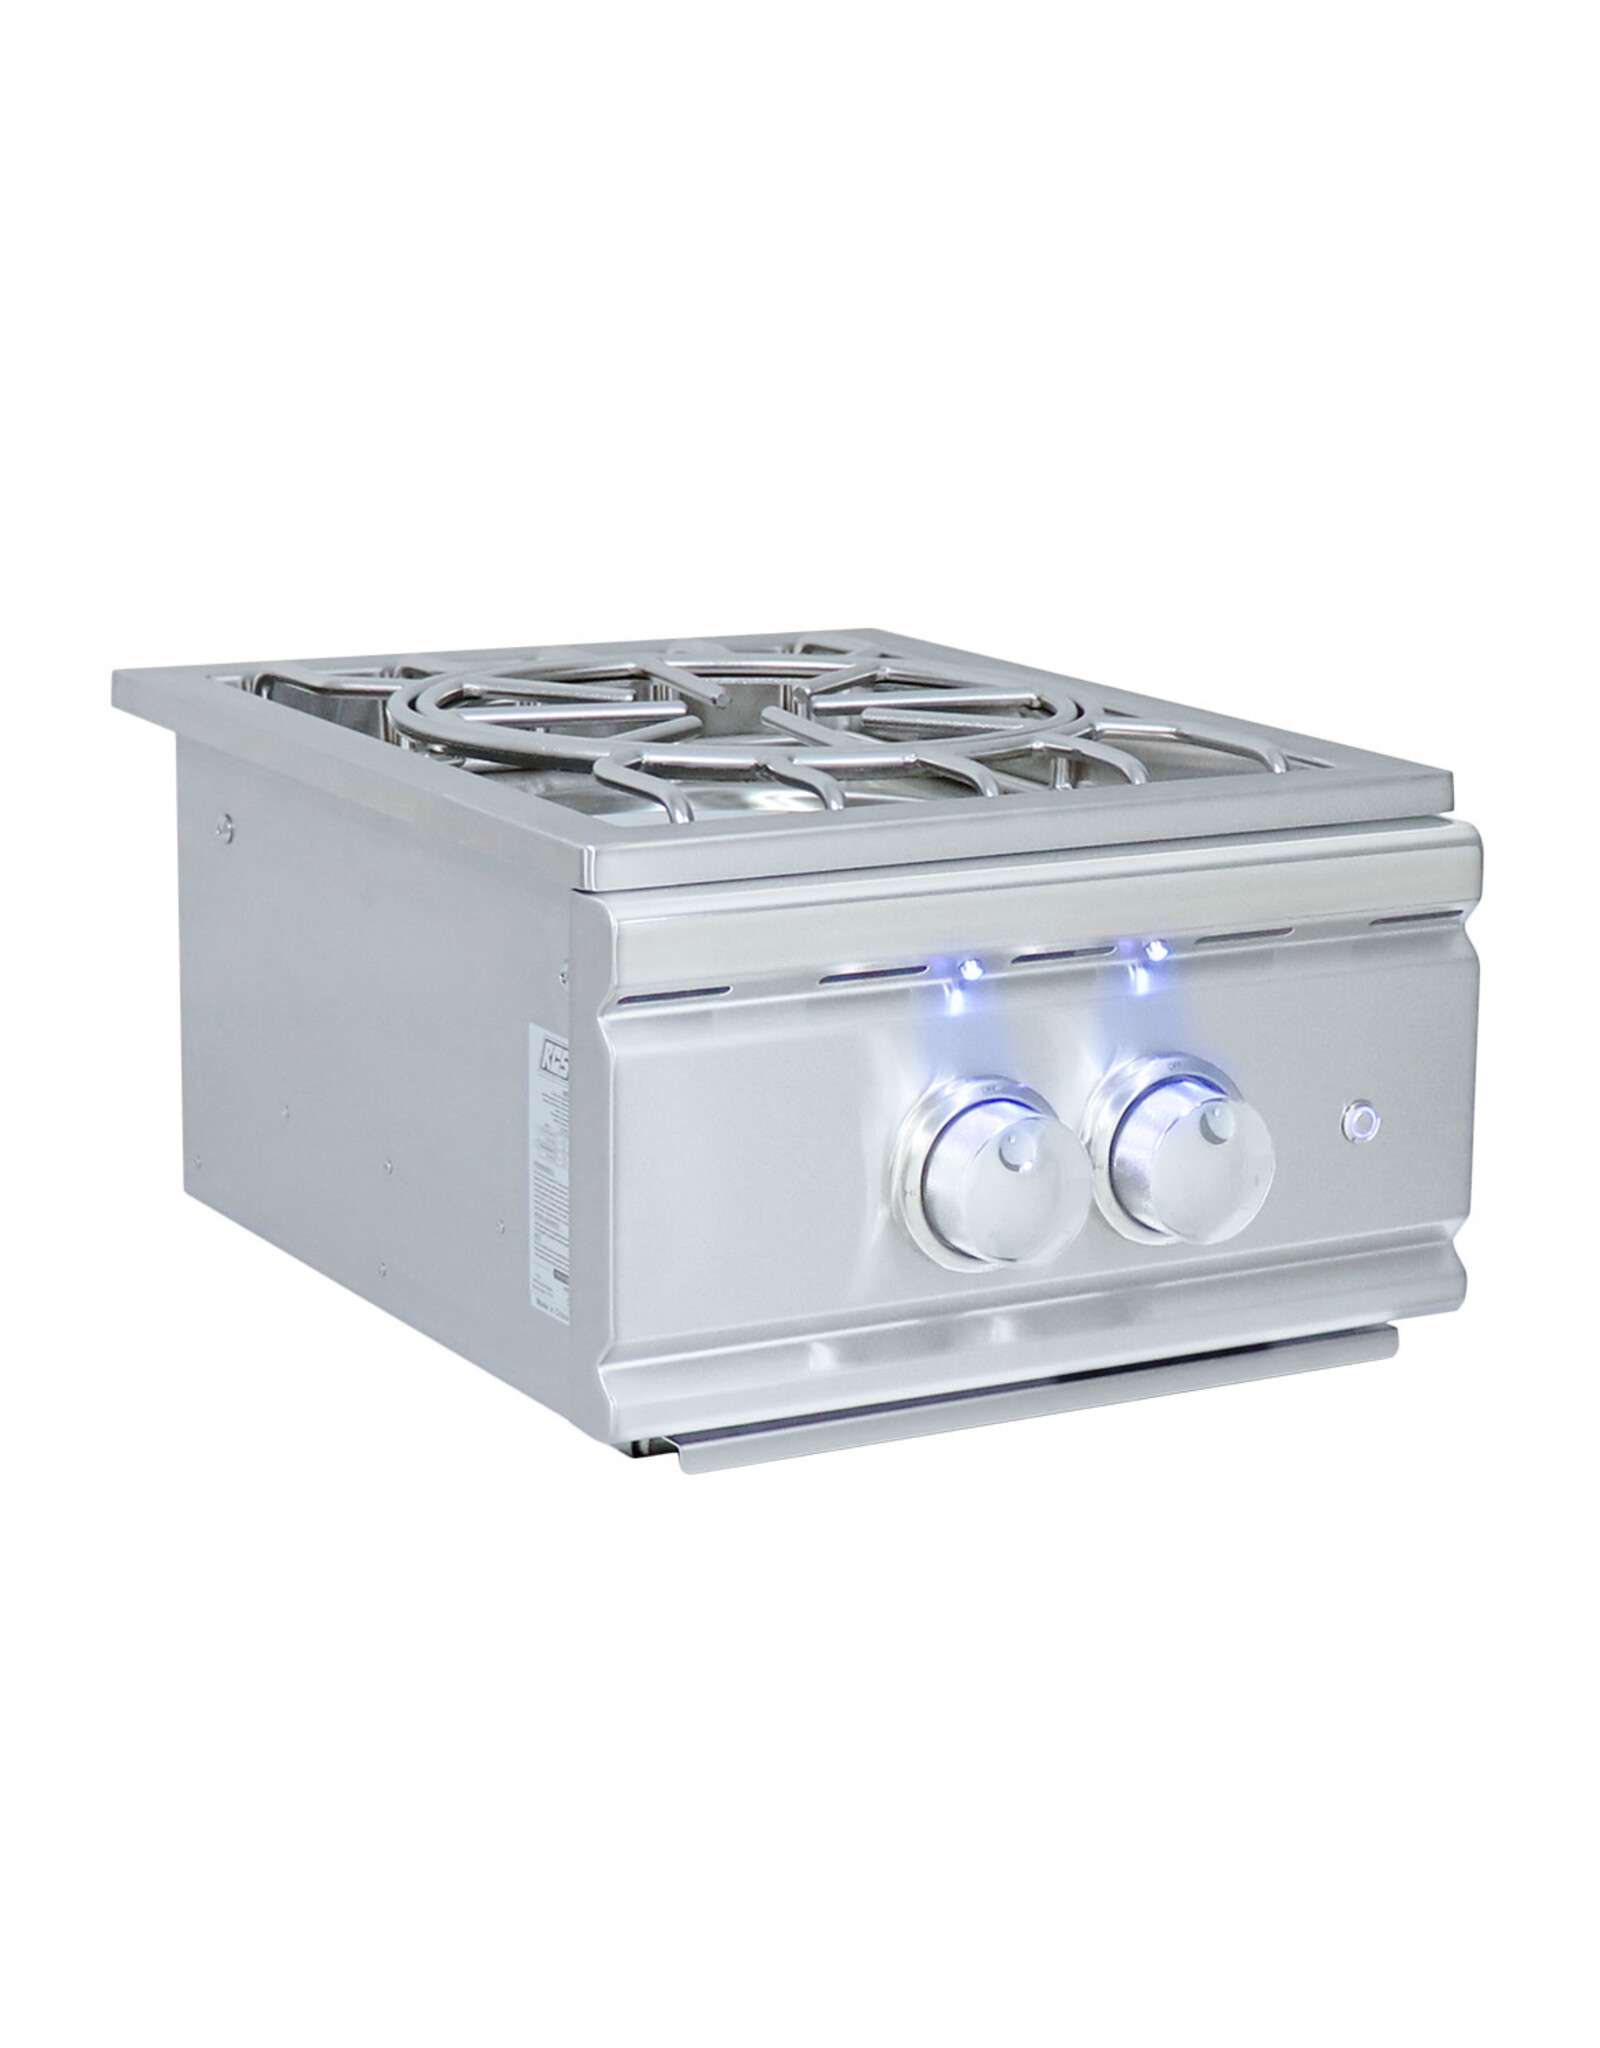 Renaissance Cooking Systems The Cutlass Pro Series Pro Burner with LED Lights - Natural Gas - RSB3A